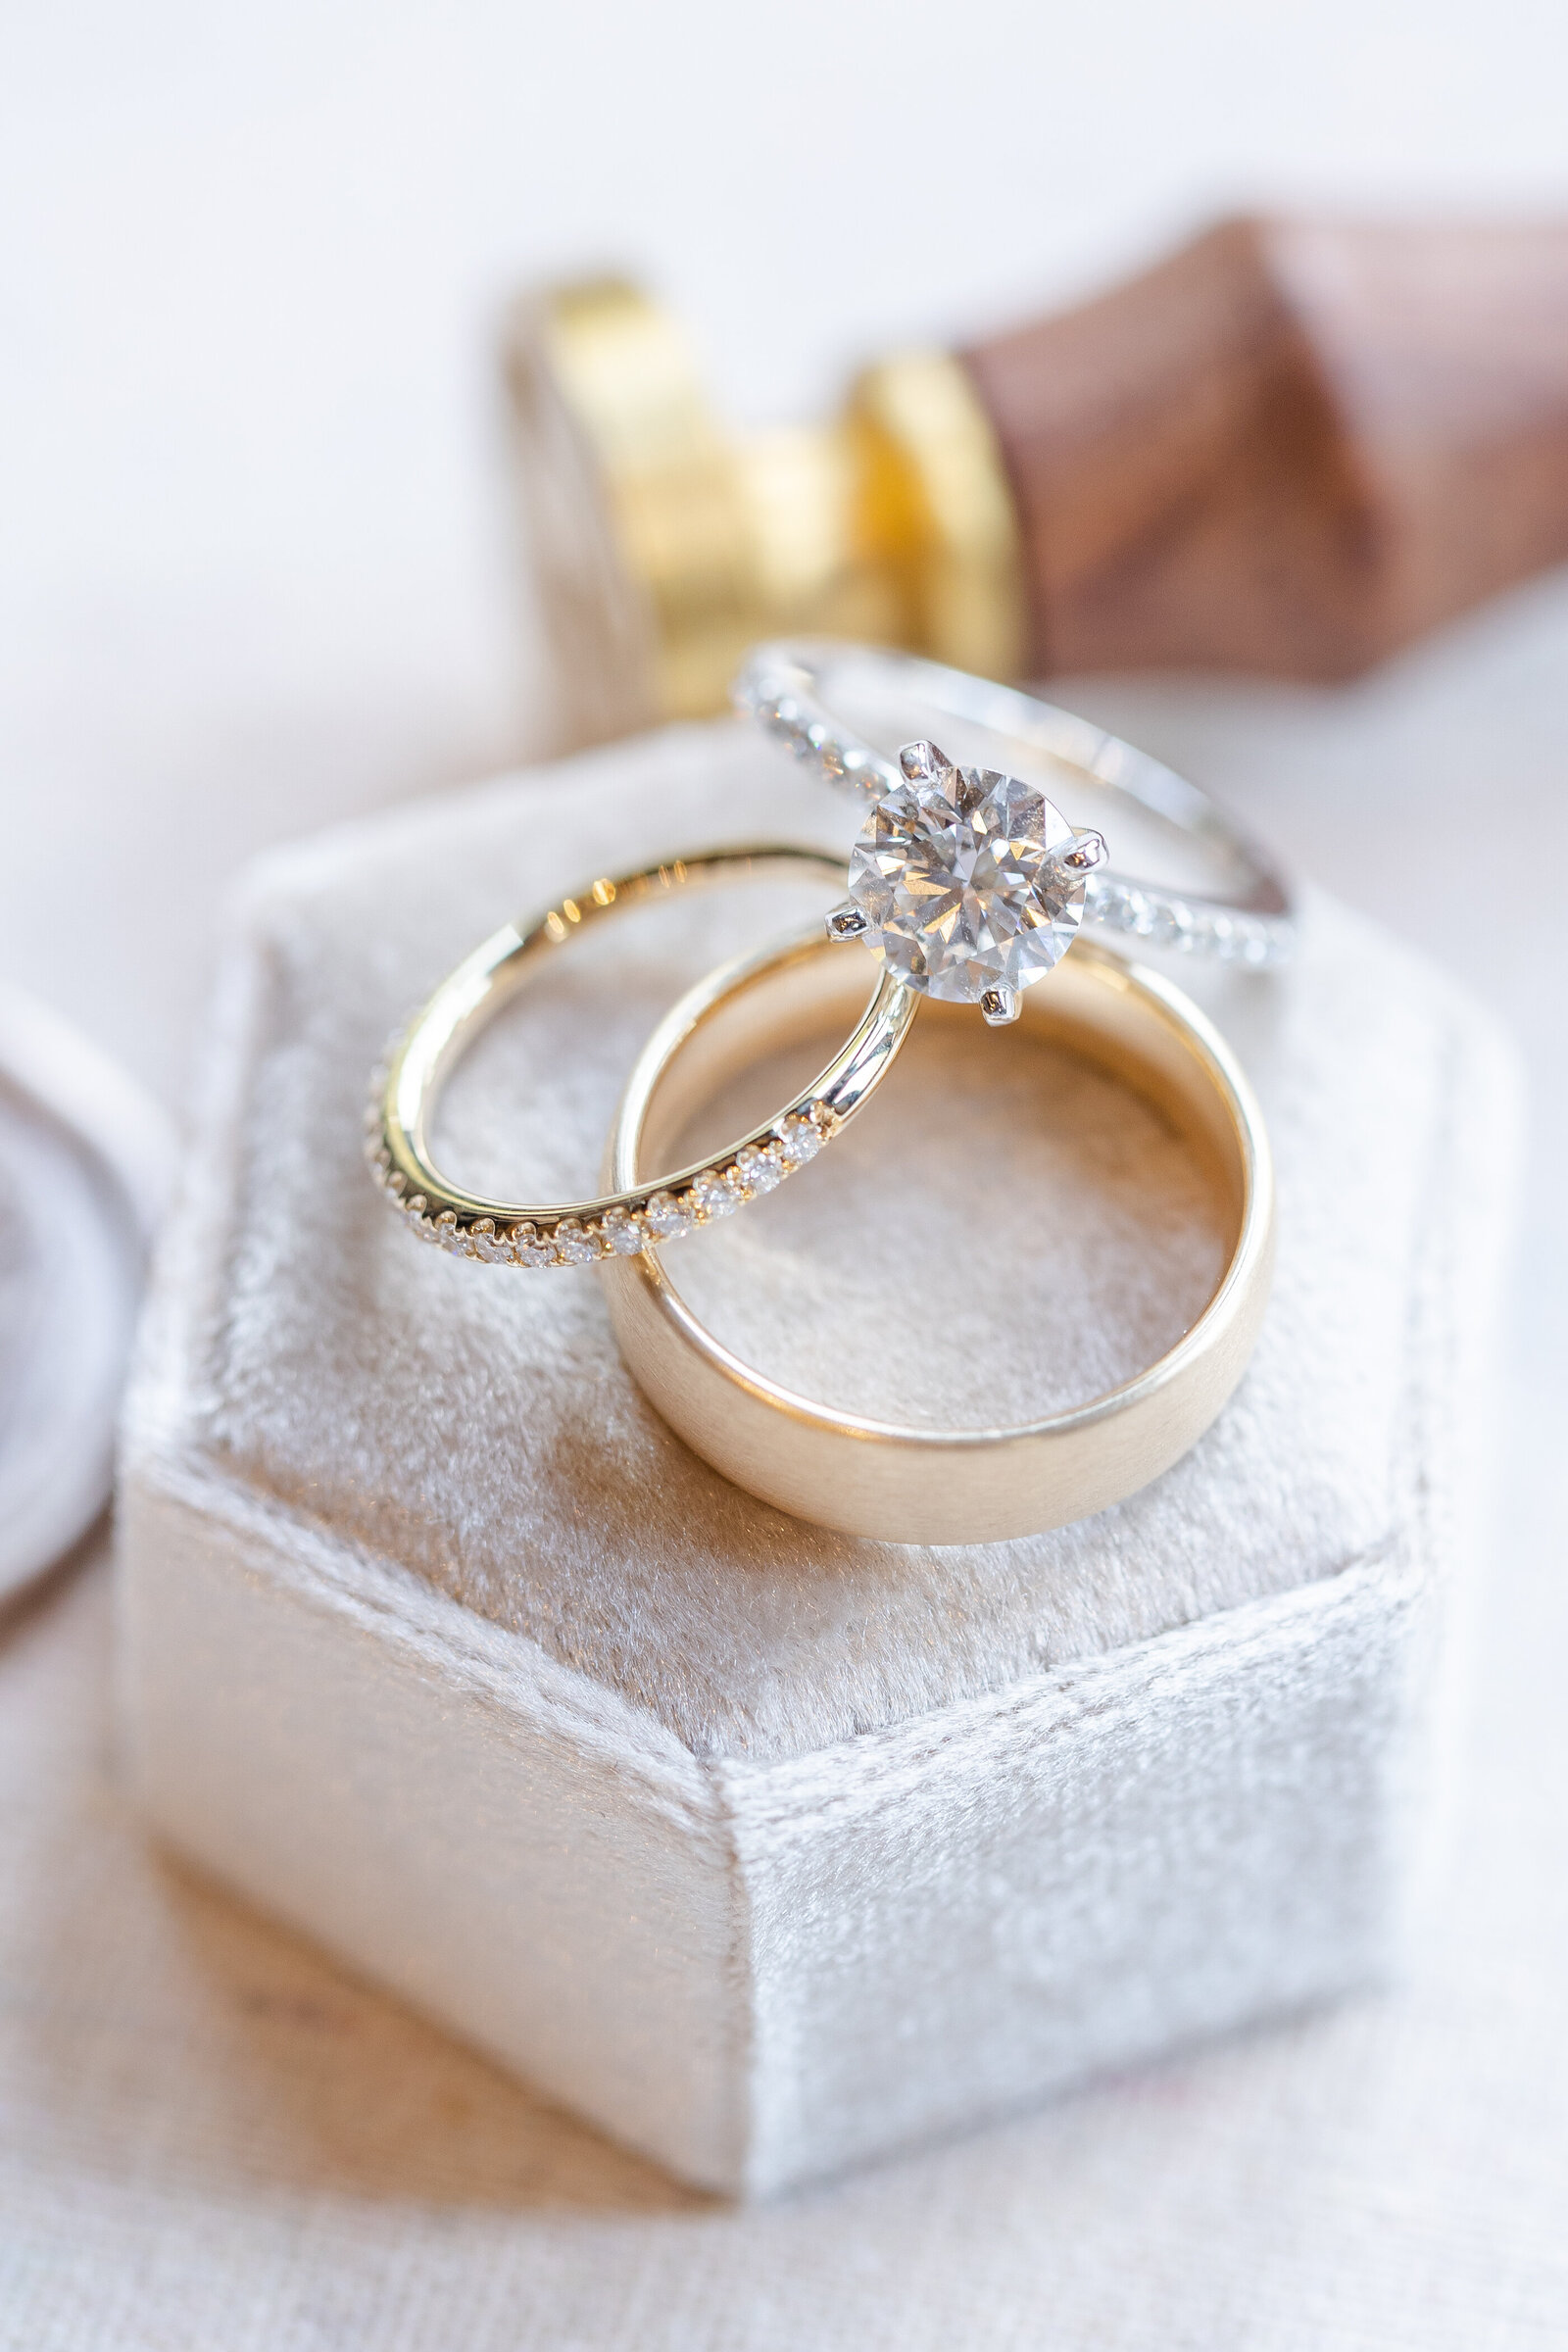 Wedding rings by Riley James Photography.